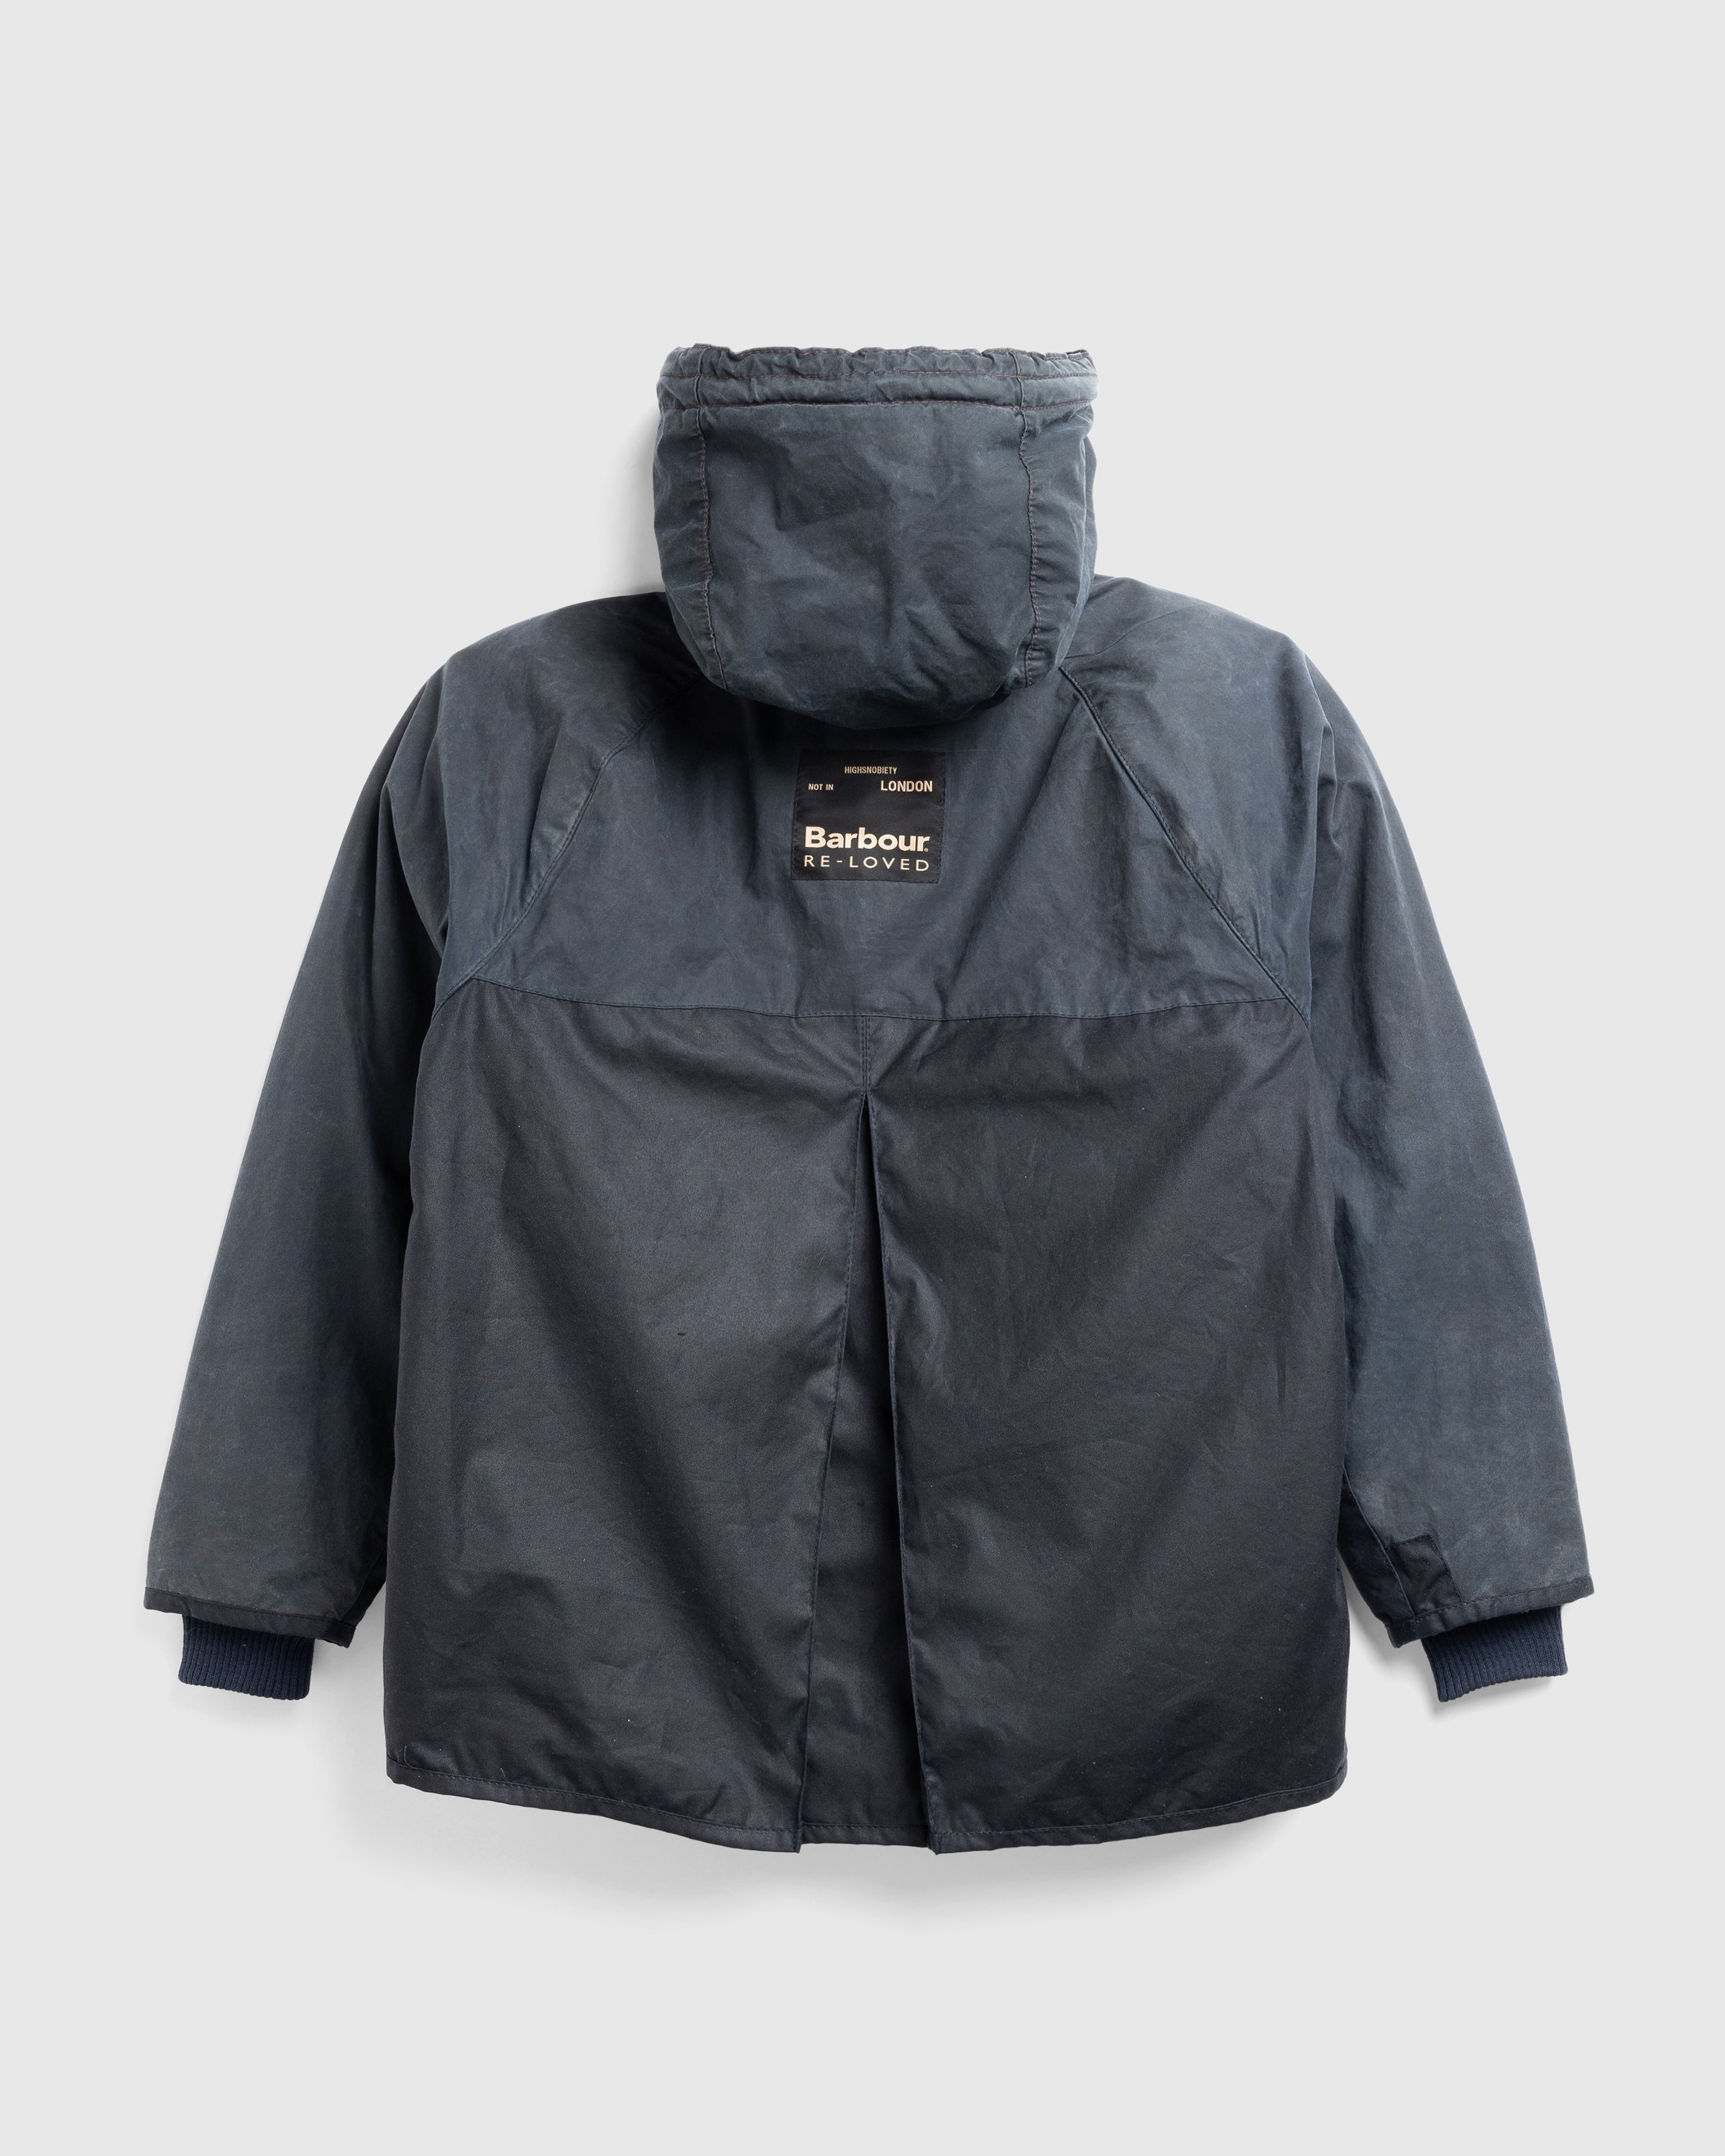 Barbour x Highsnobiety - Re-Loved Cropped Bedale Jacket 1 - 36 - Grey-Black - Clothing -  - Image 2